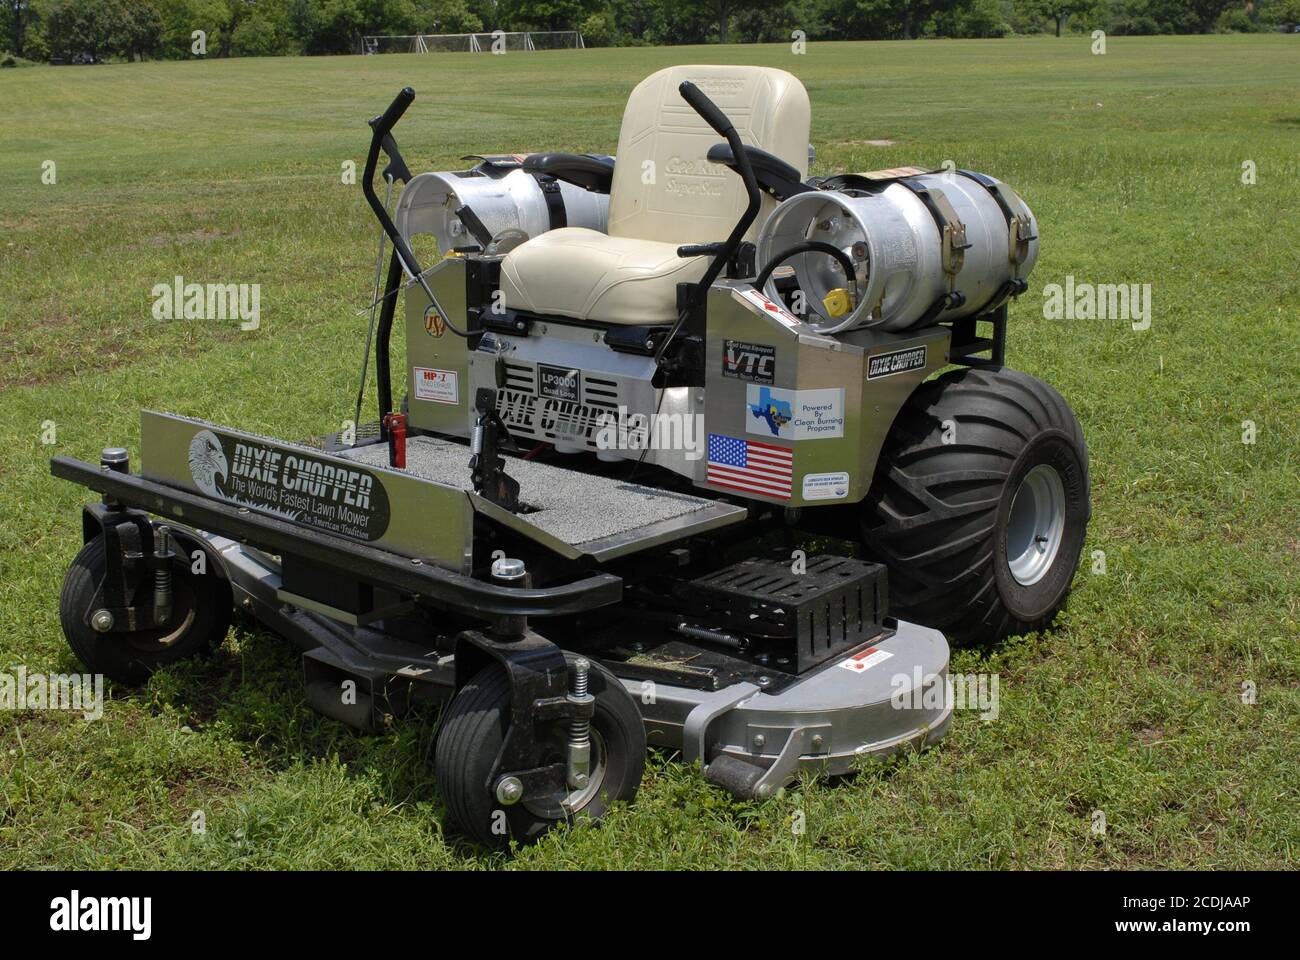 Austin, Texas, USA, May 11, 2007: Commercial awn mower powered by propane on display to promote clean-powered vehicles. ©Bob Daemmrich Stock Photo